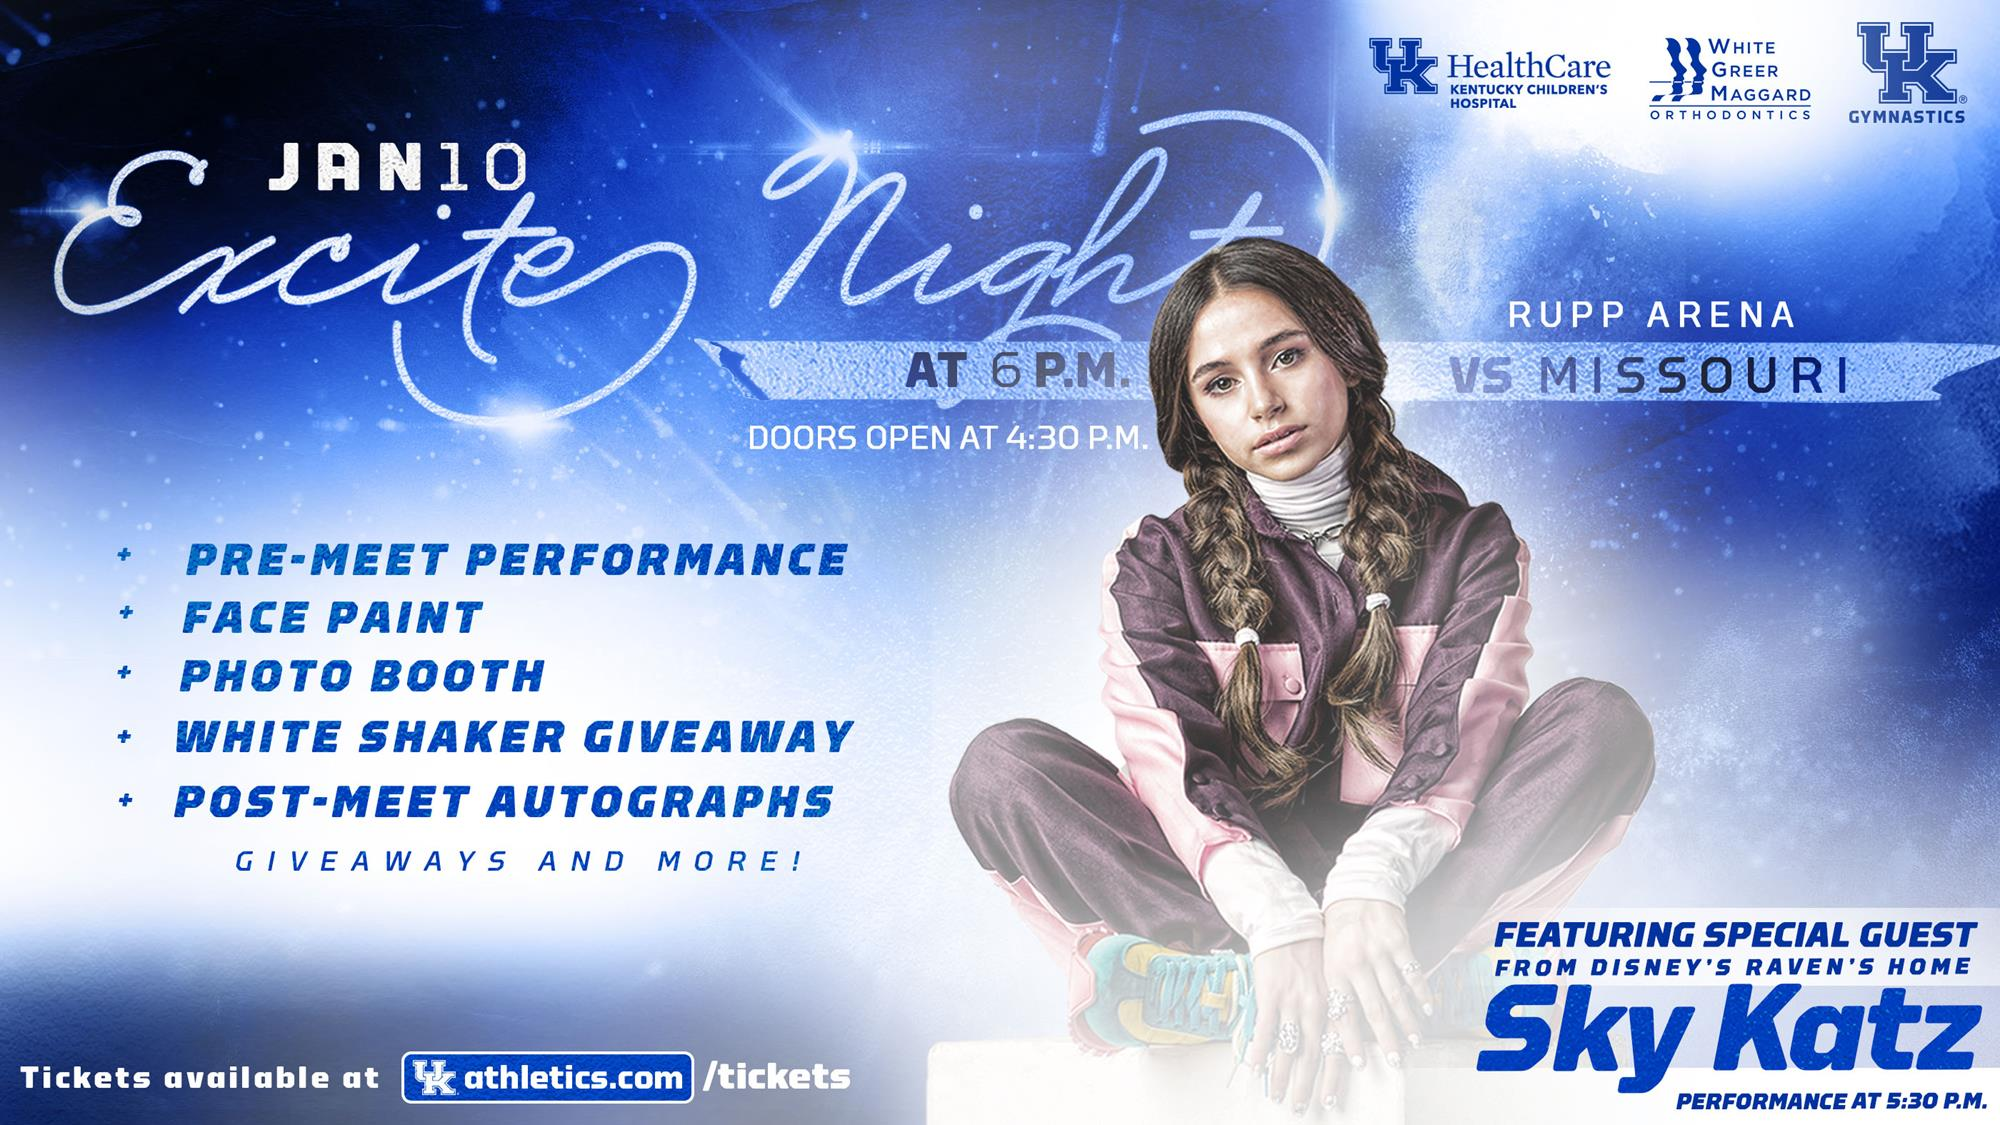 Excite Night Returns to Rupp Arena Friday, Jan. 10 at 6 p.m.